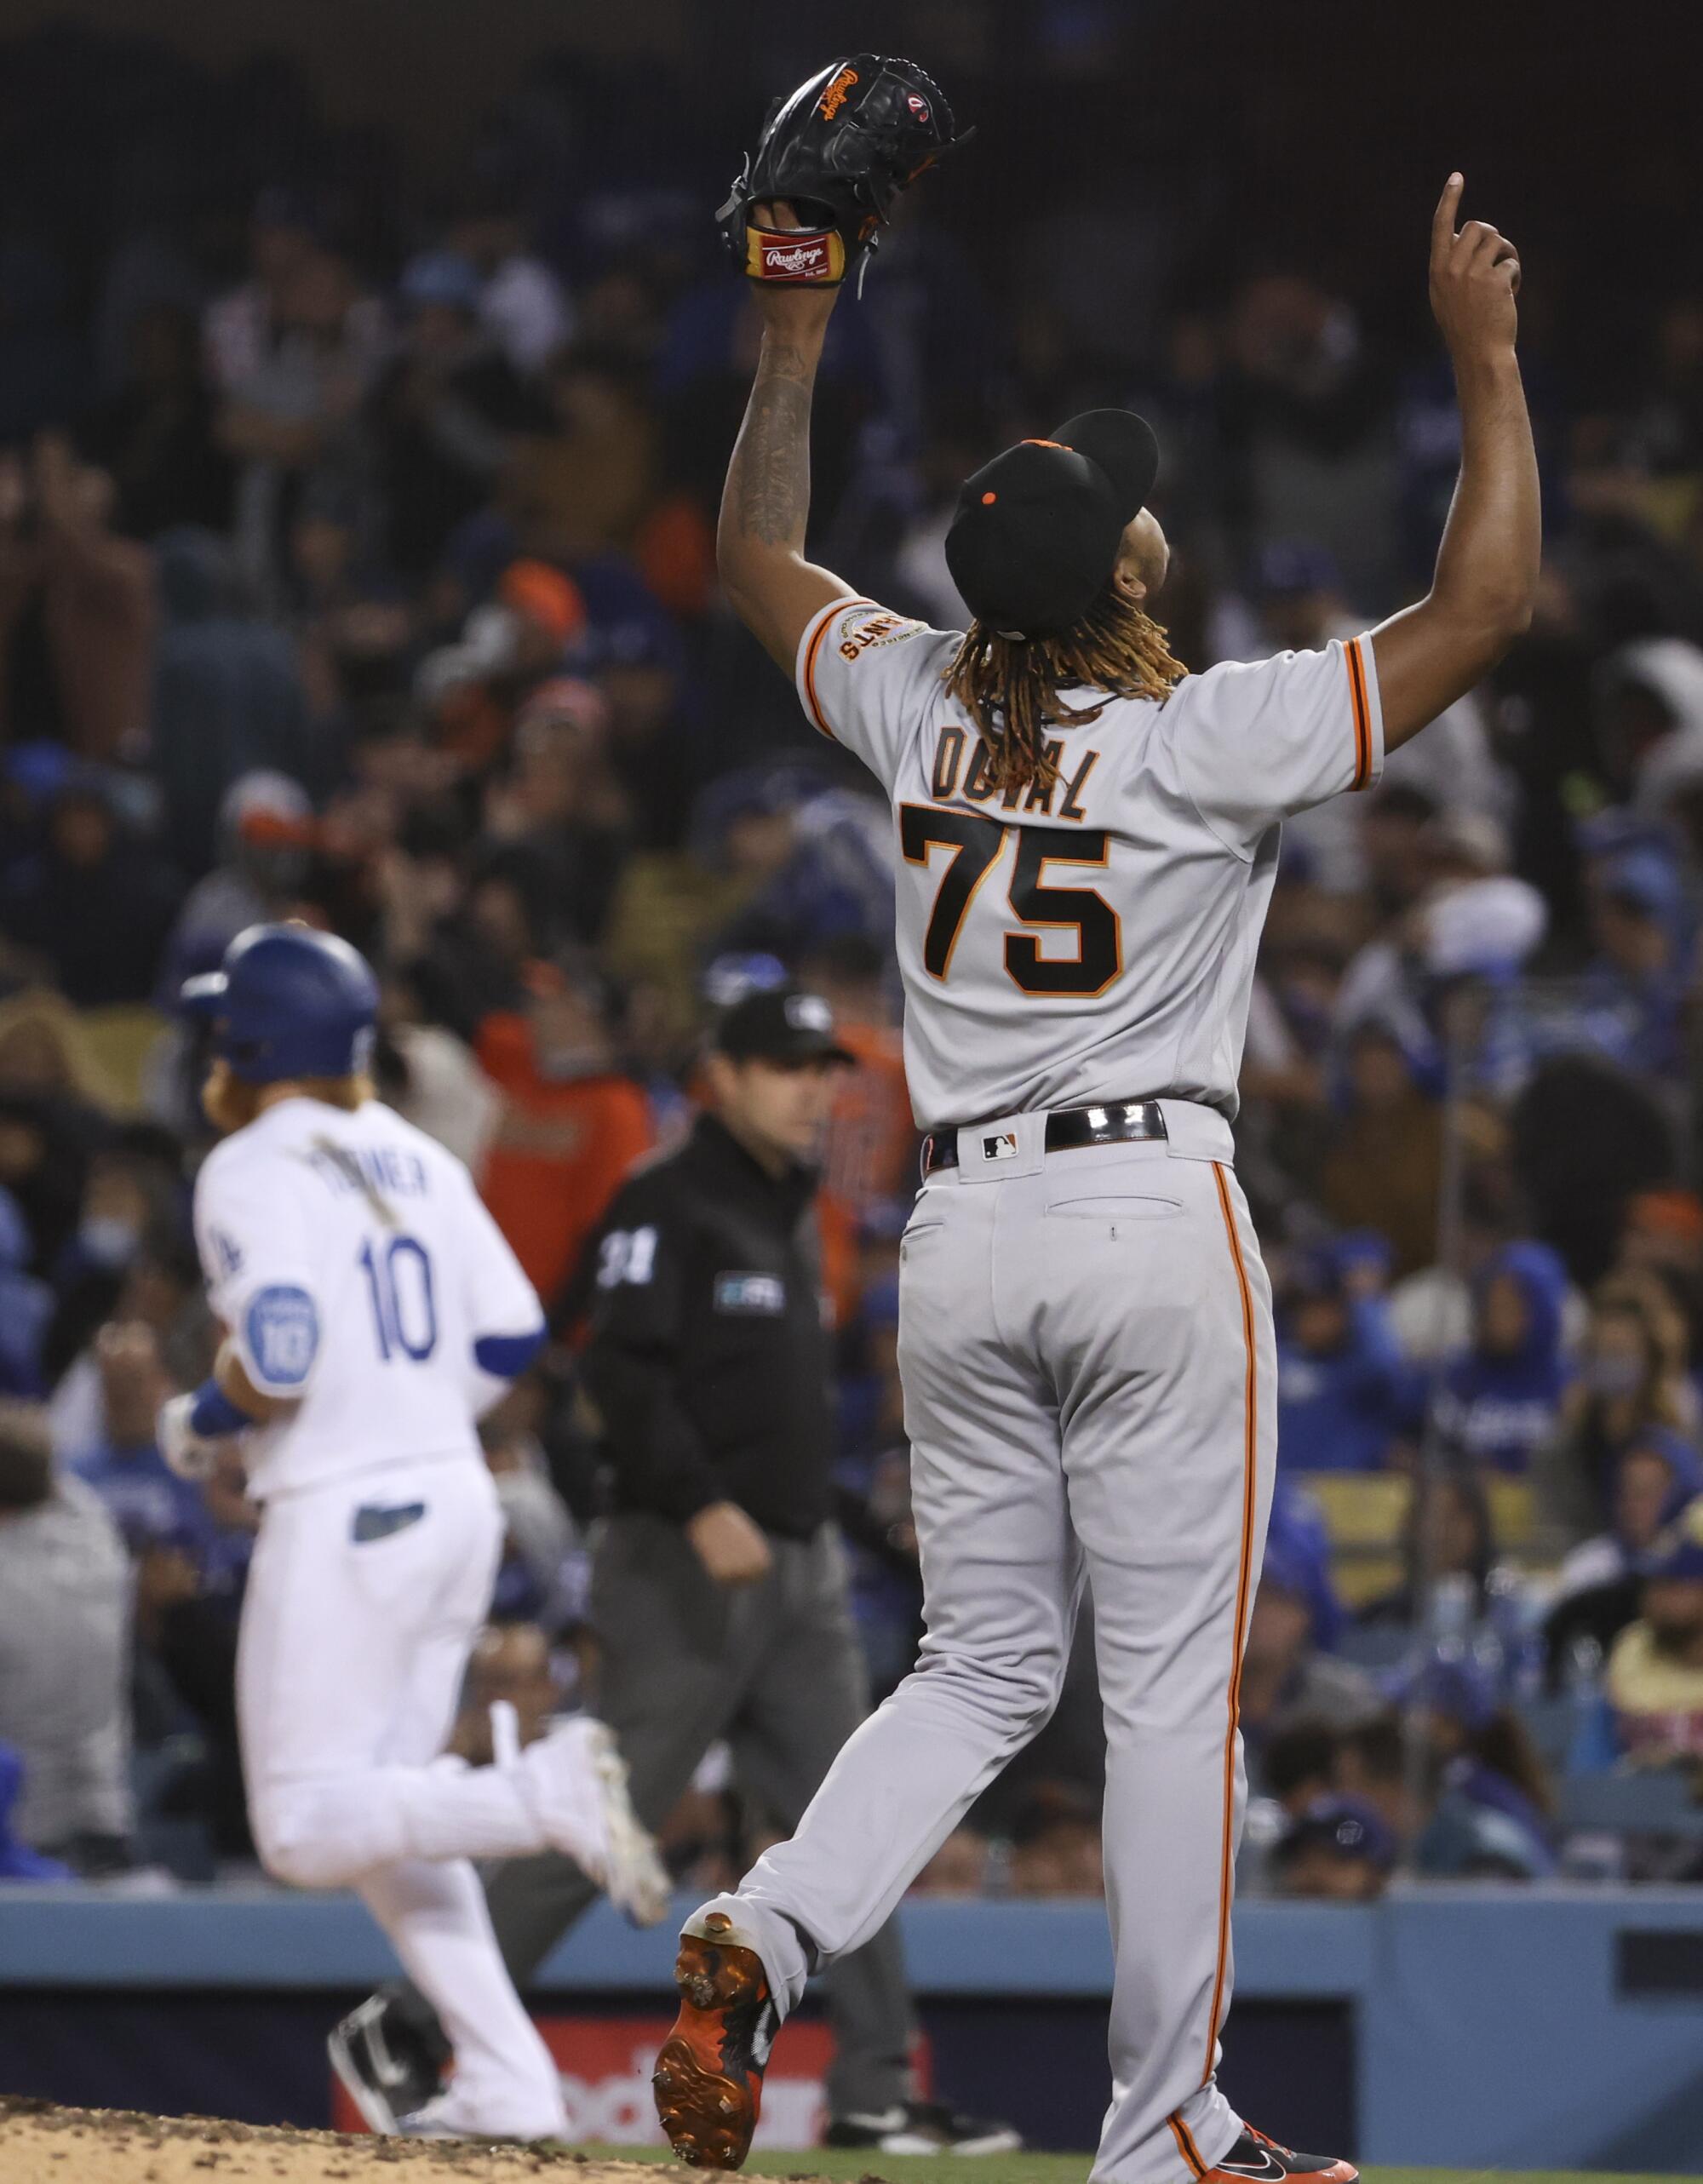  Giants relief pitcher Camilo Doval reacts